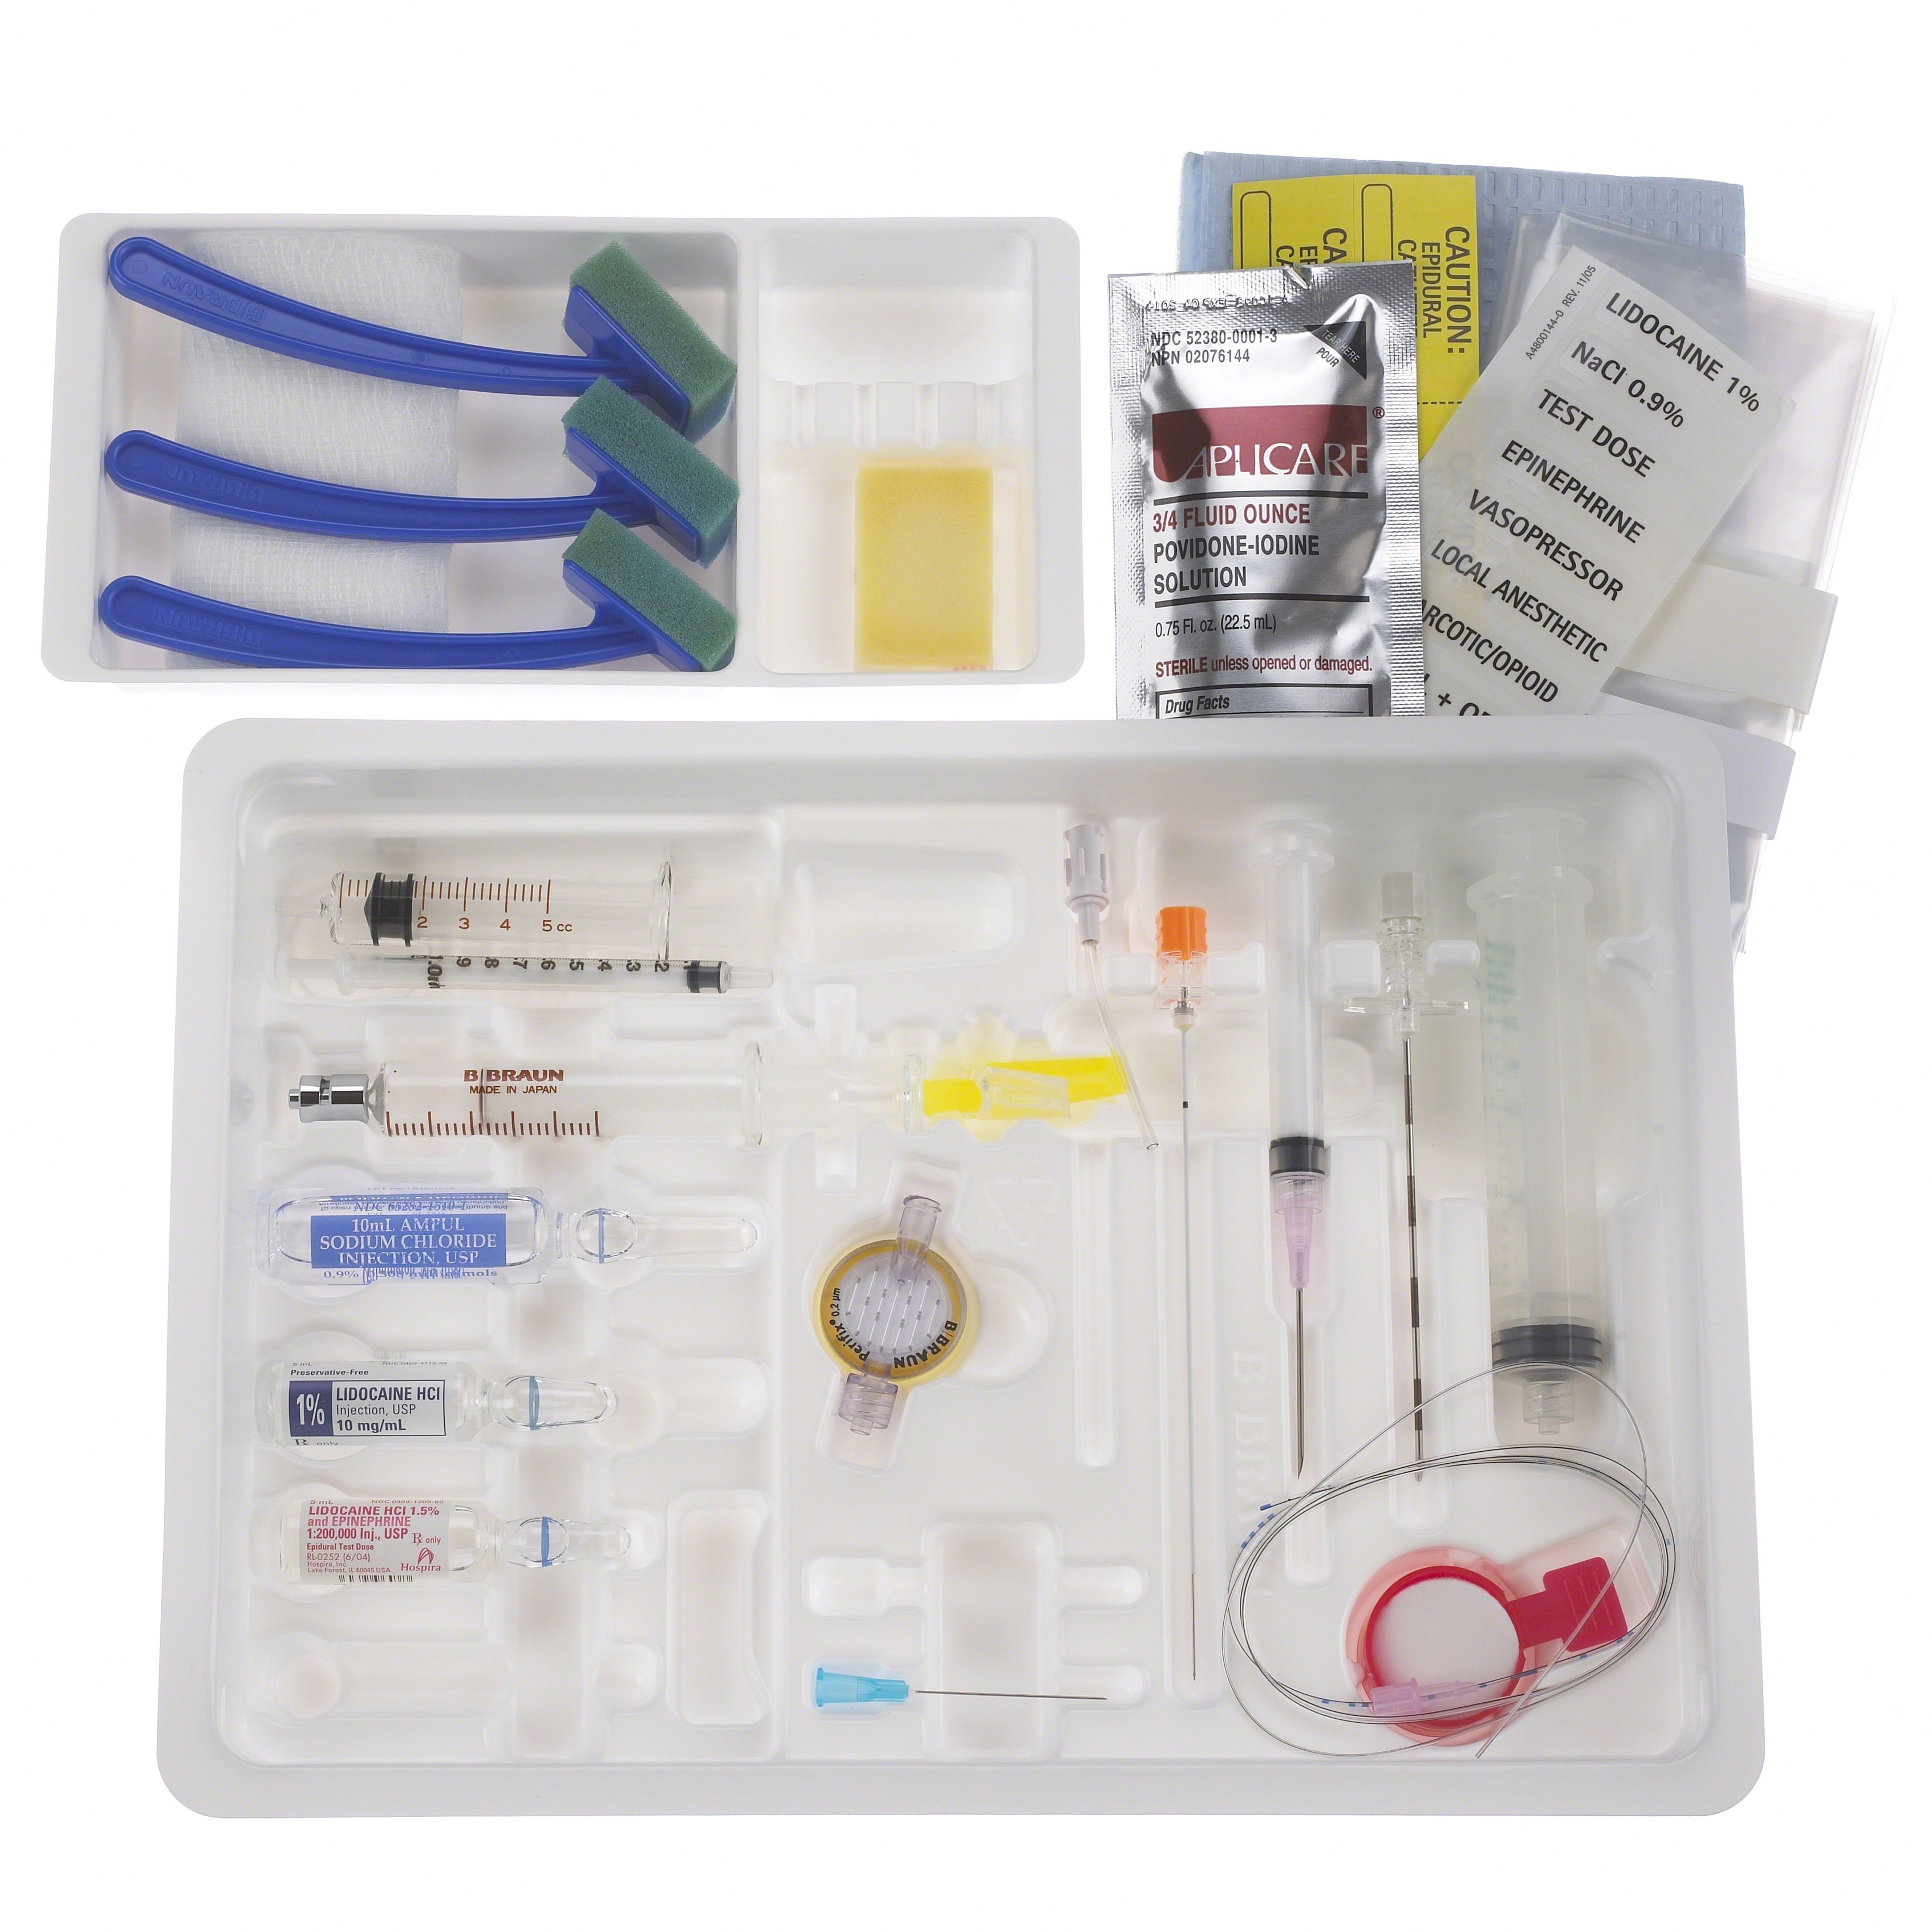 B. Braun Combined Spinal Epidural Tray Kits - ESPOCAN 17 Ga x 3Â½ in Tuohy, PENCAN 25 Ga x 5 in Pencil-Point Spinal Needle, PERIFIX 20 Ga Closed Tip, 5 mL Glass Luer Lock LOR Tray Kit